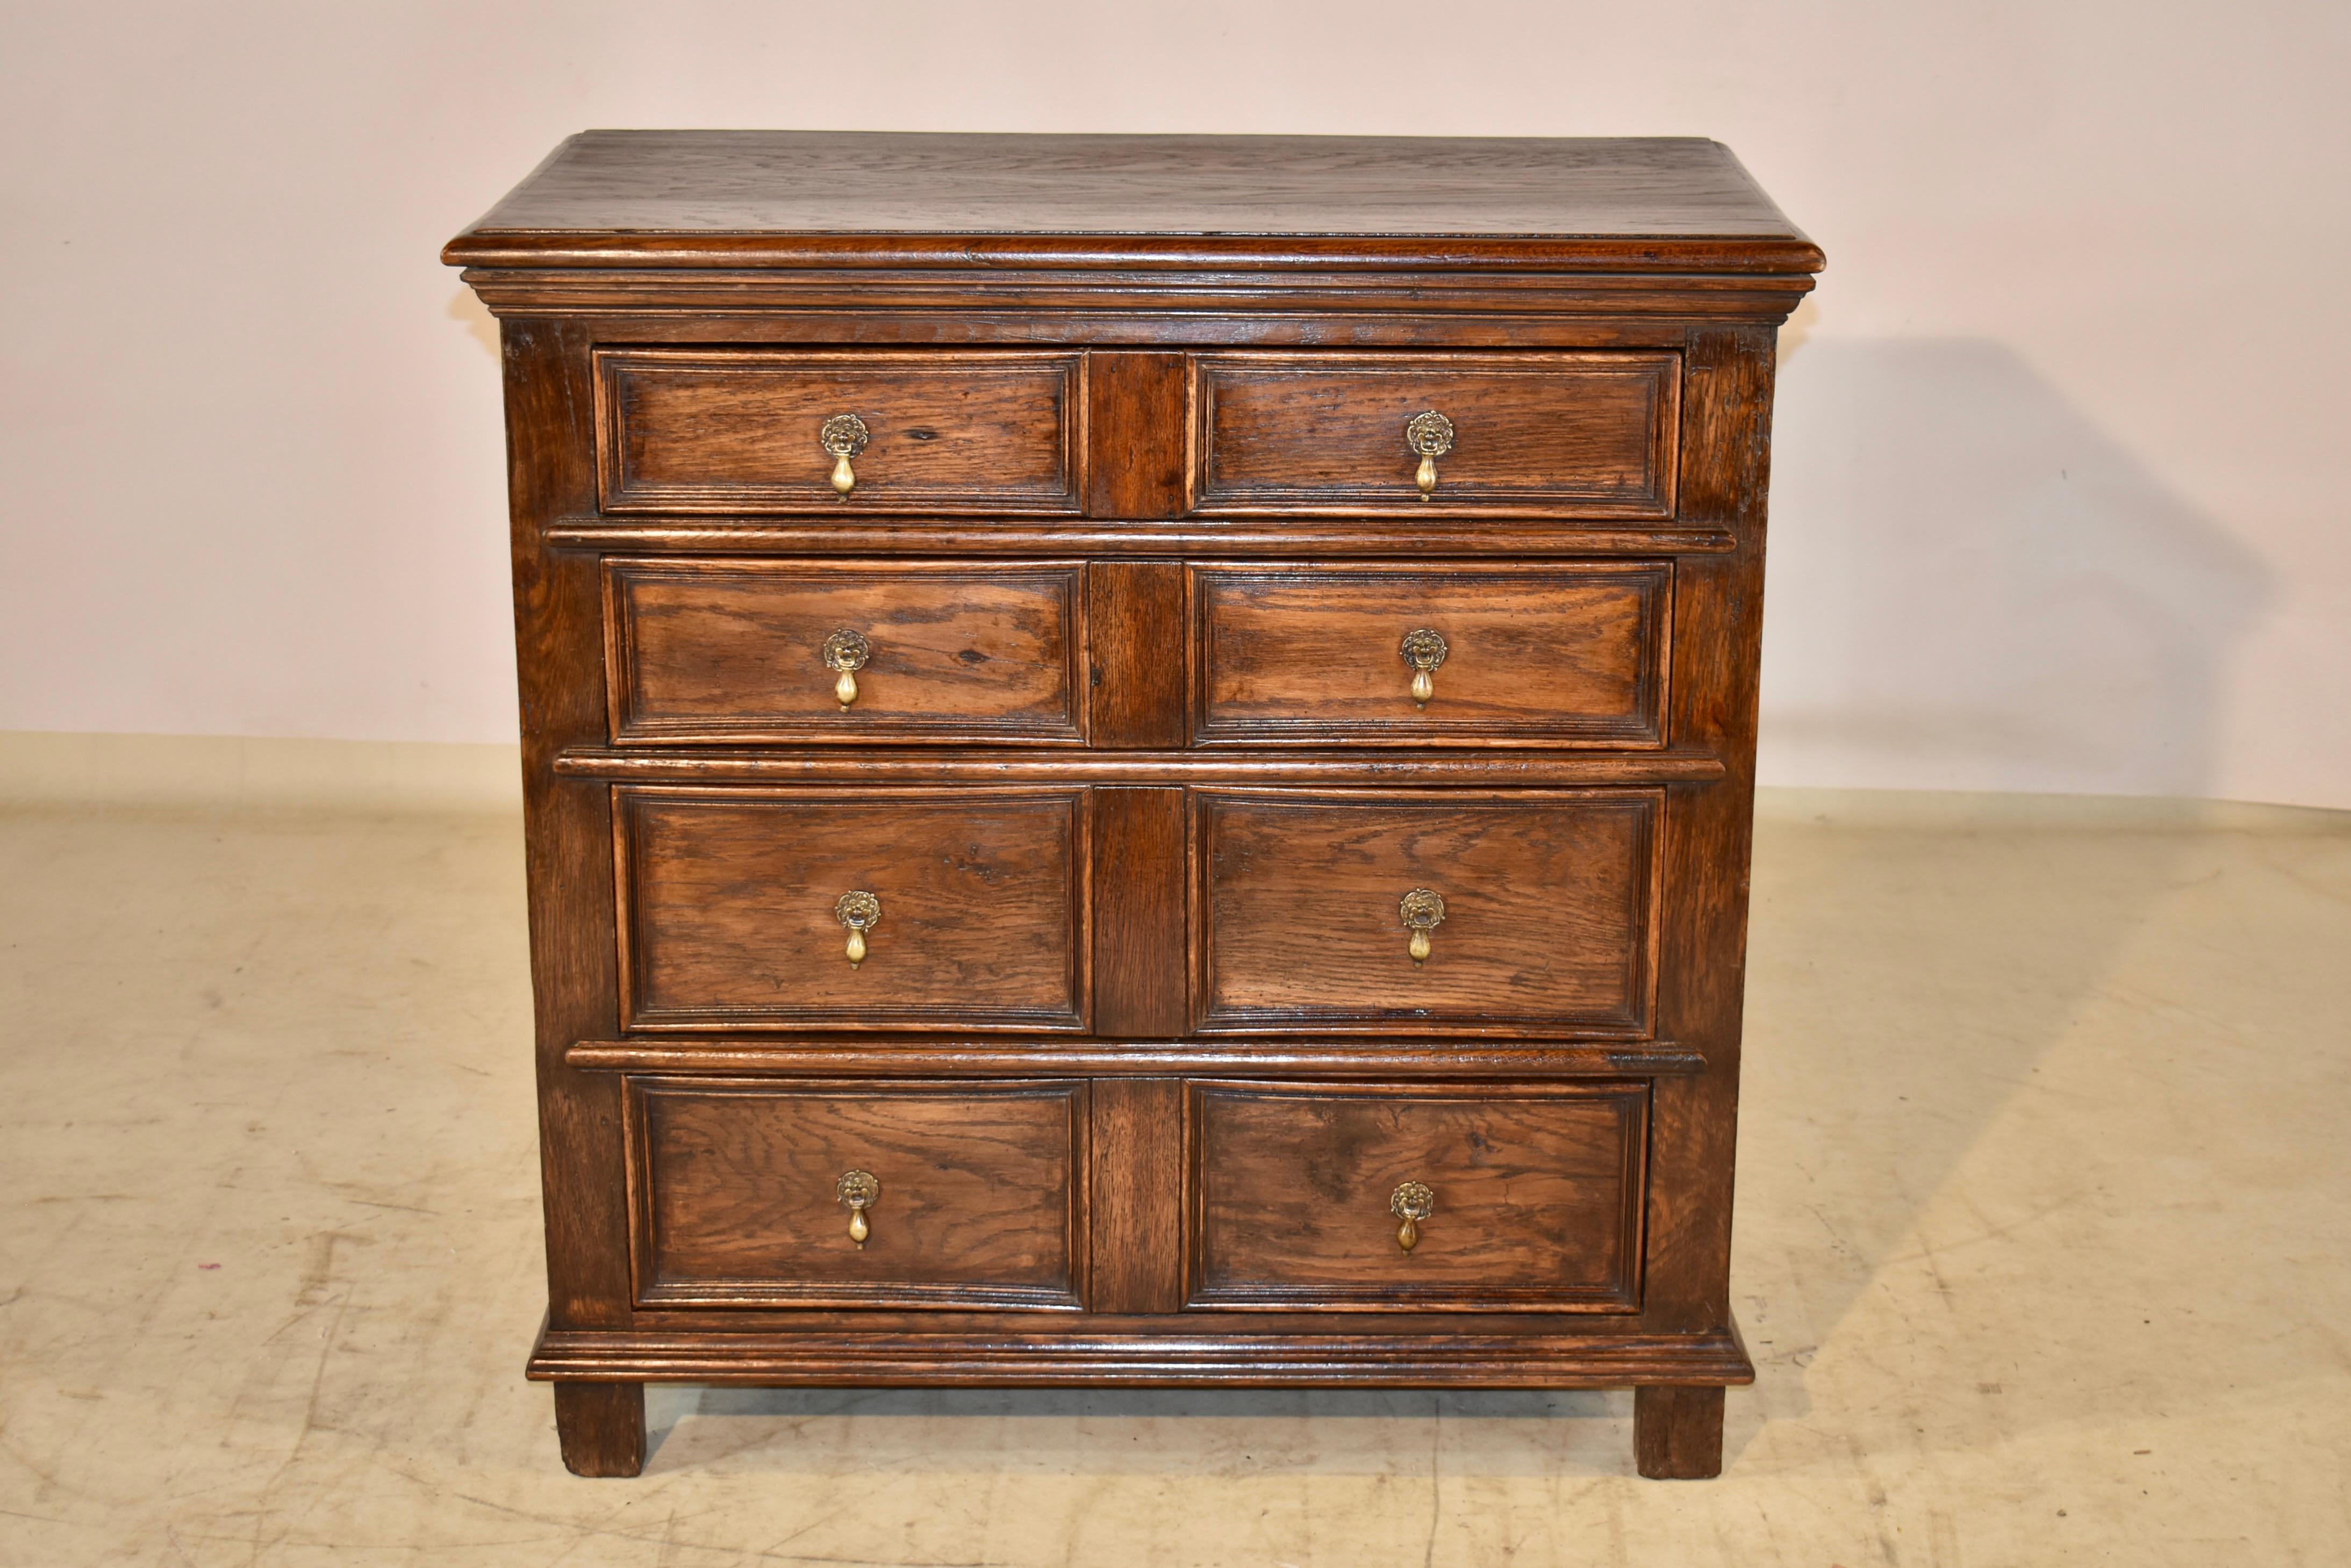 English oak geometric chest of drawers, circa 1940. The top has a beveled edge, over a molded edge, and follows down to simple paneled sides. The front of the case contains four drawers with raised paneled drawer fronts. The case has a molded base